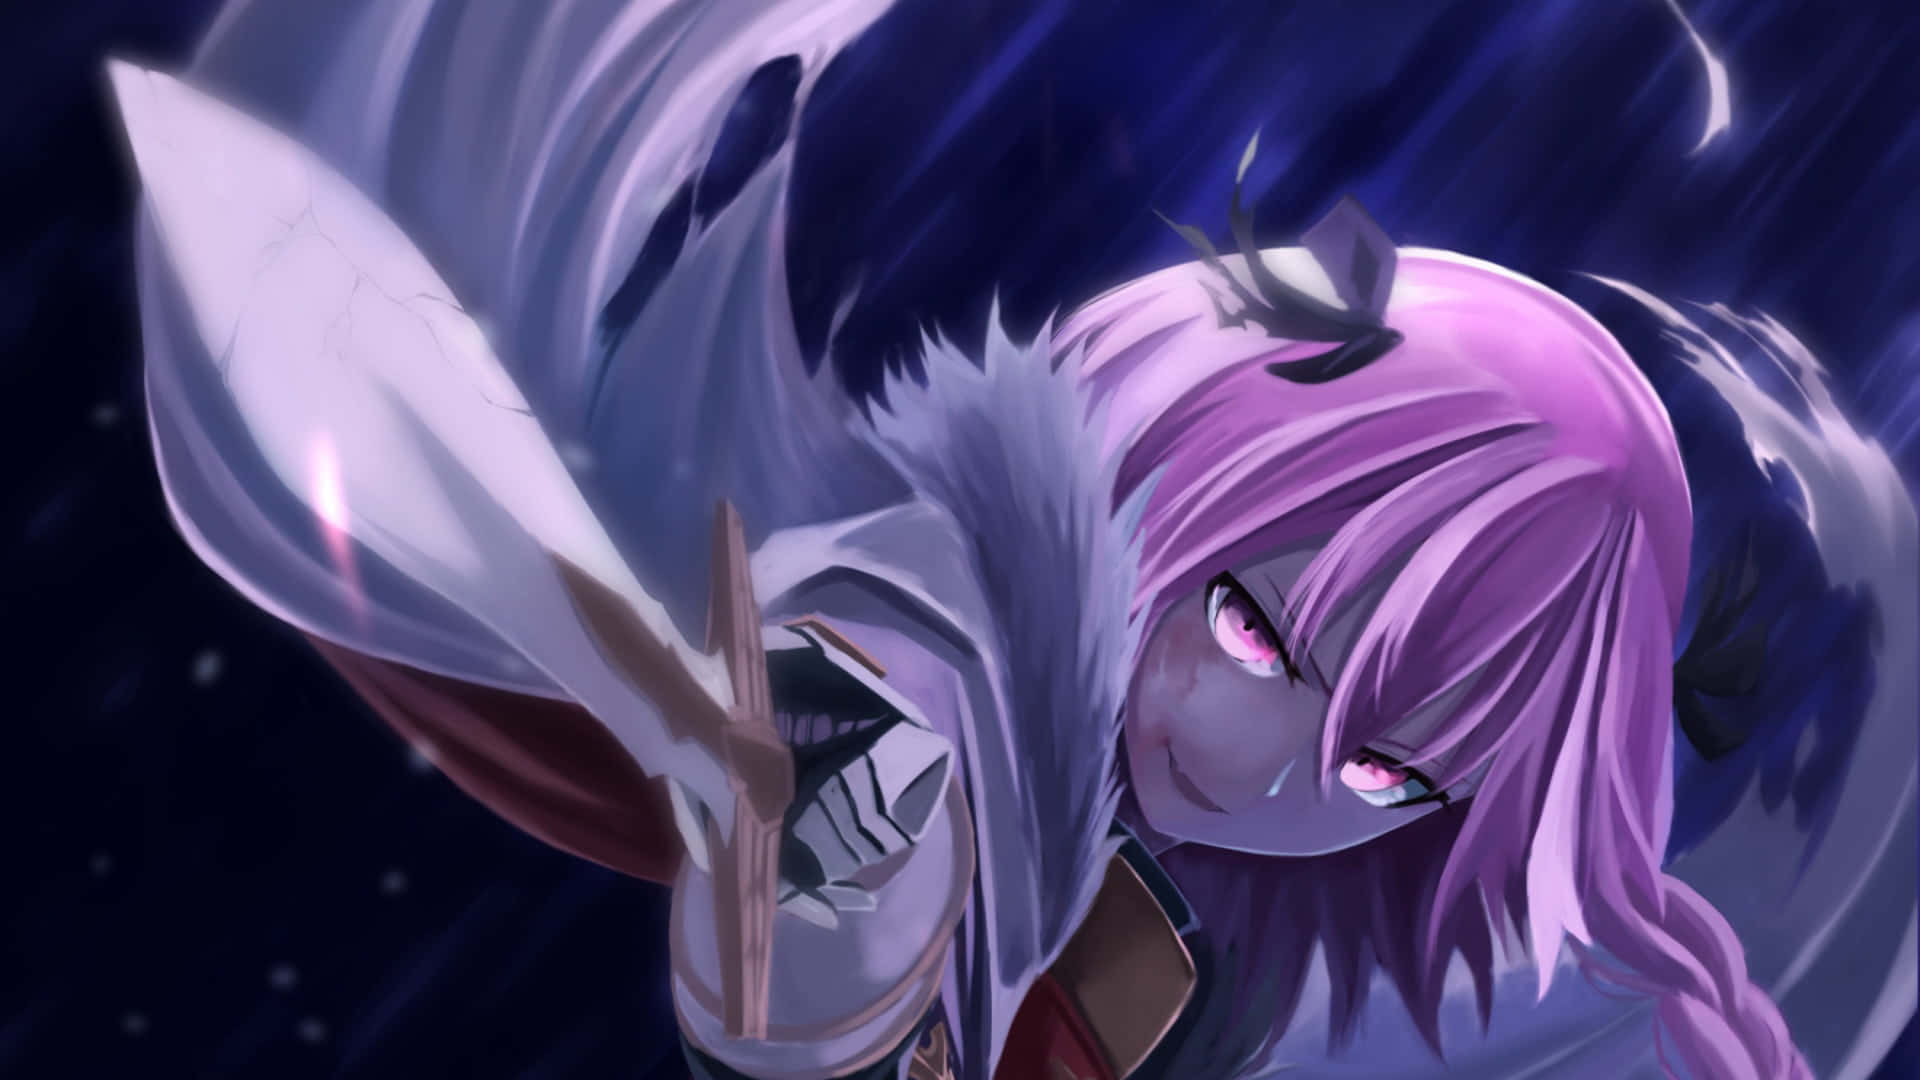 Astolfo, the Heroic Paladin from Fate/Grand Order